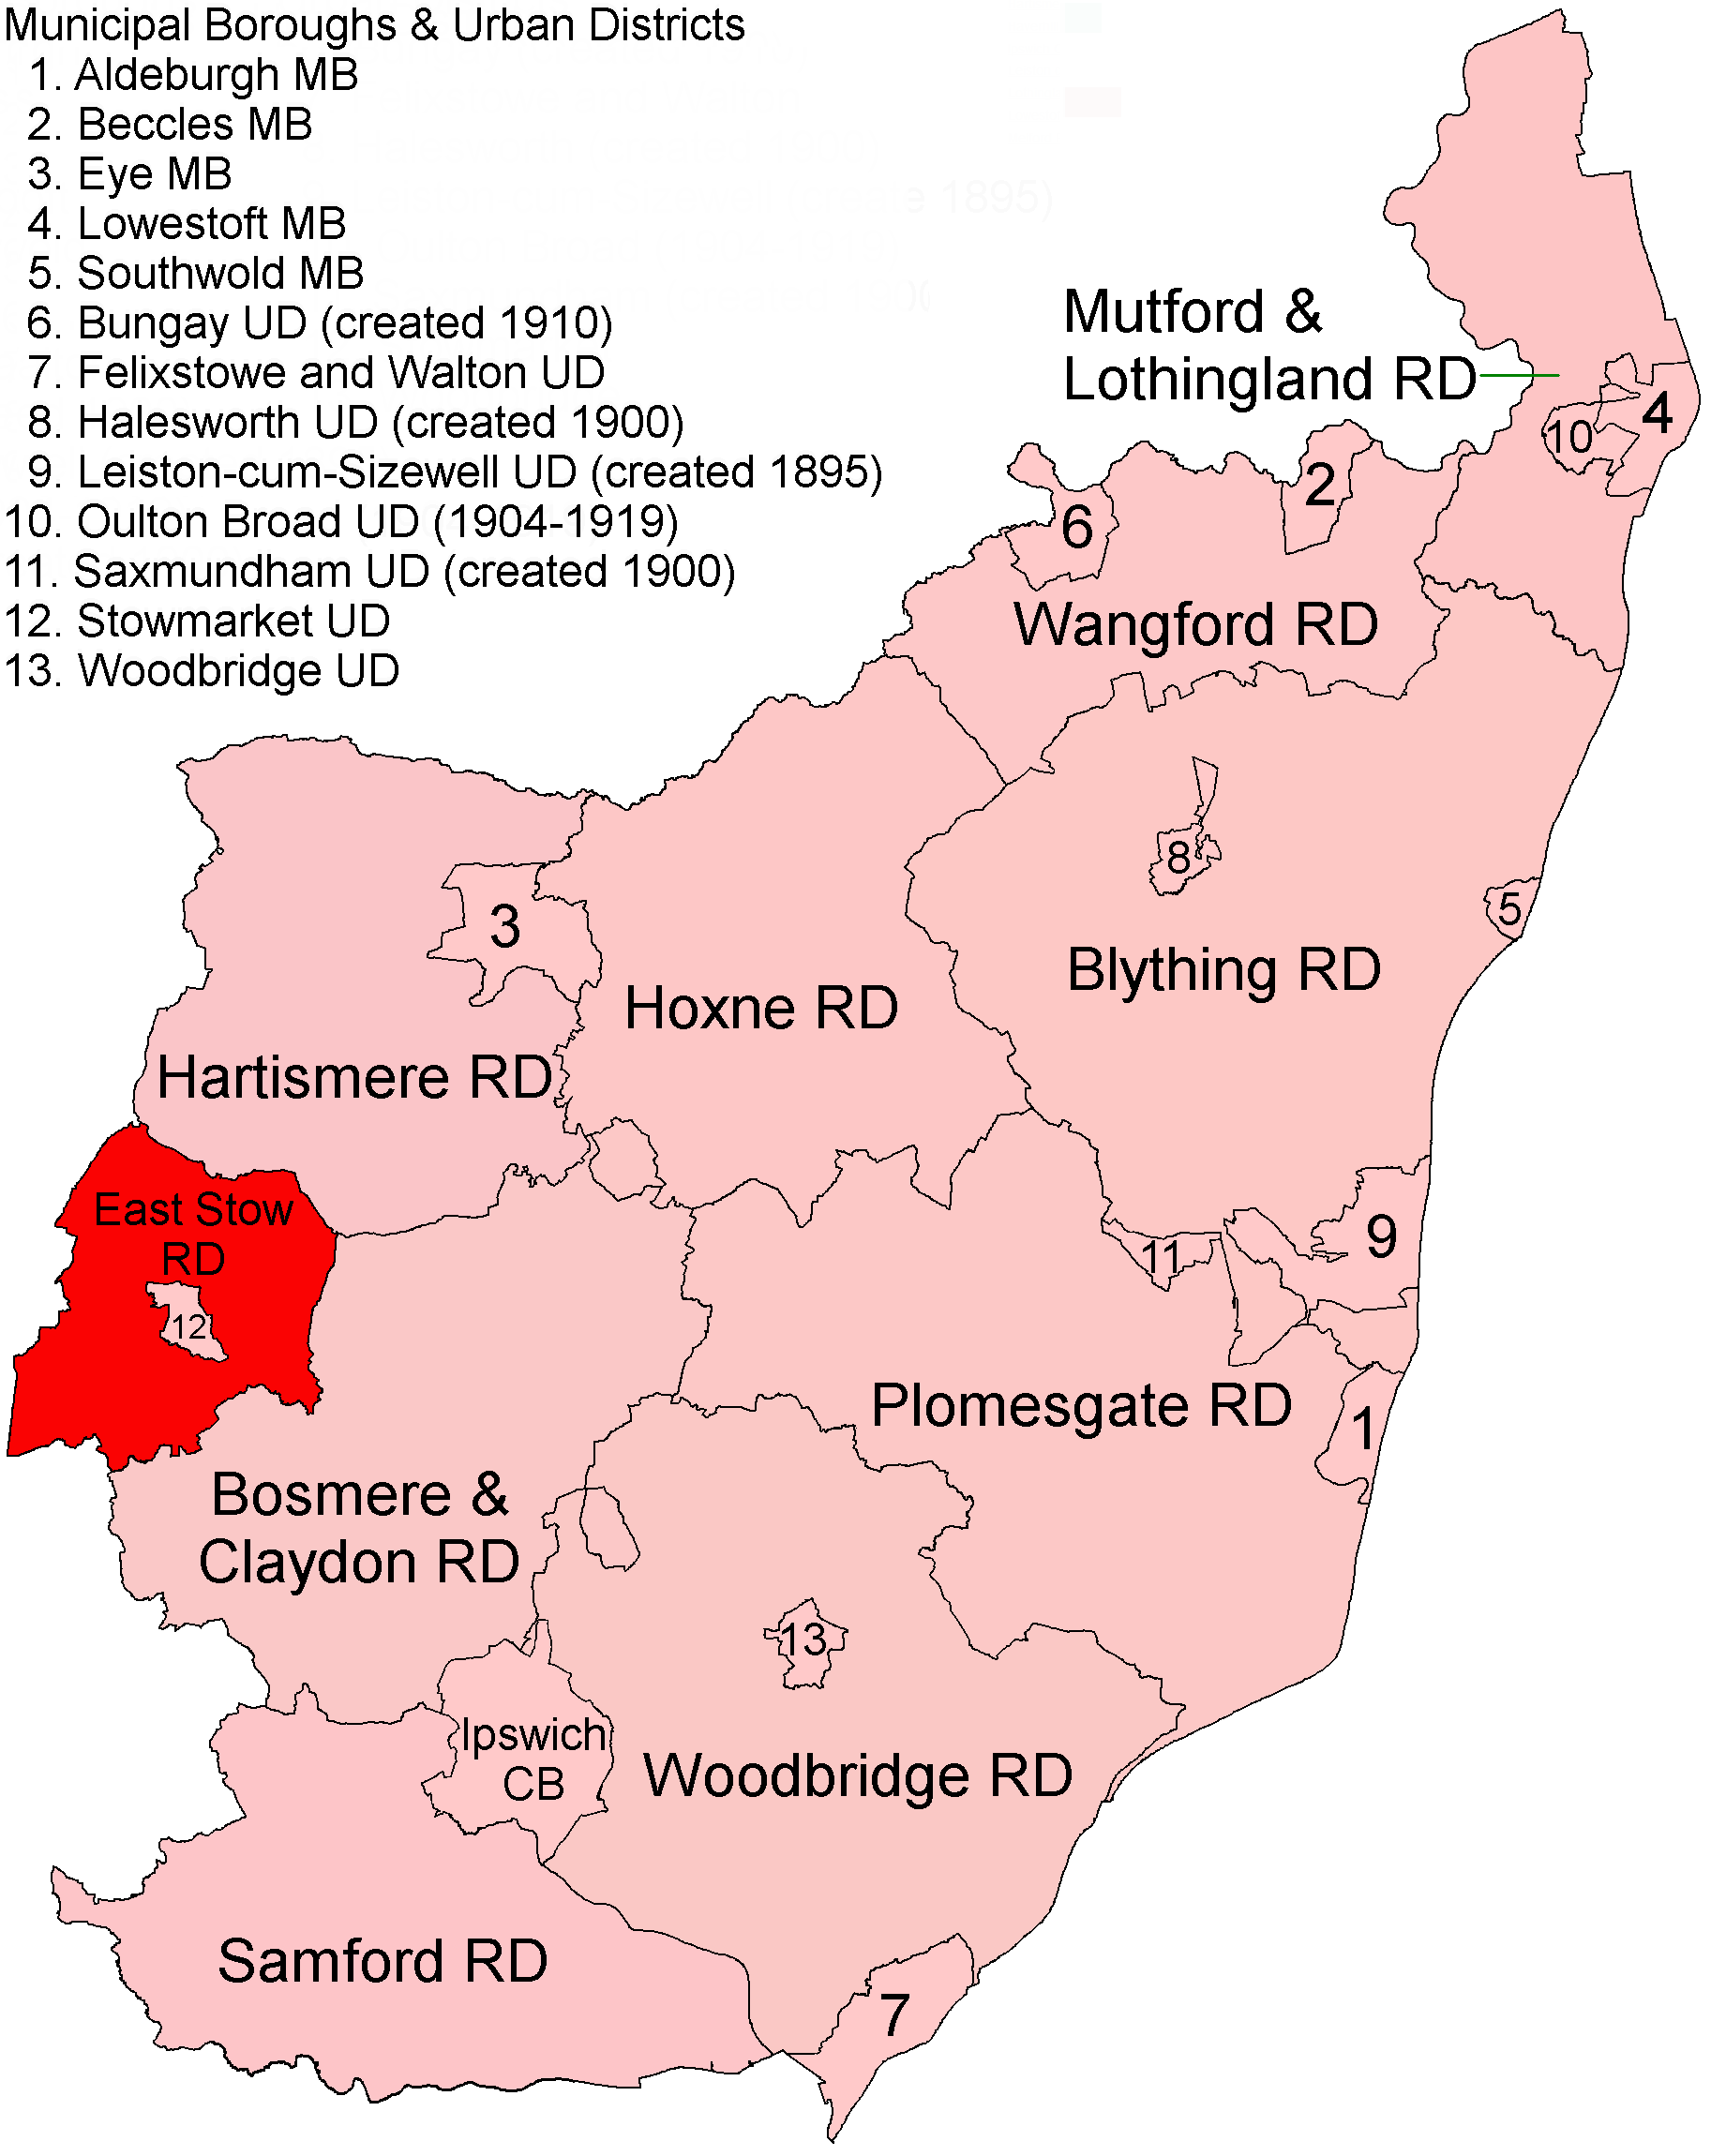 East Stow Rural District